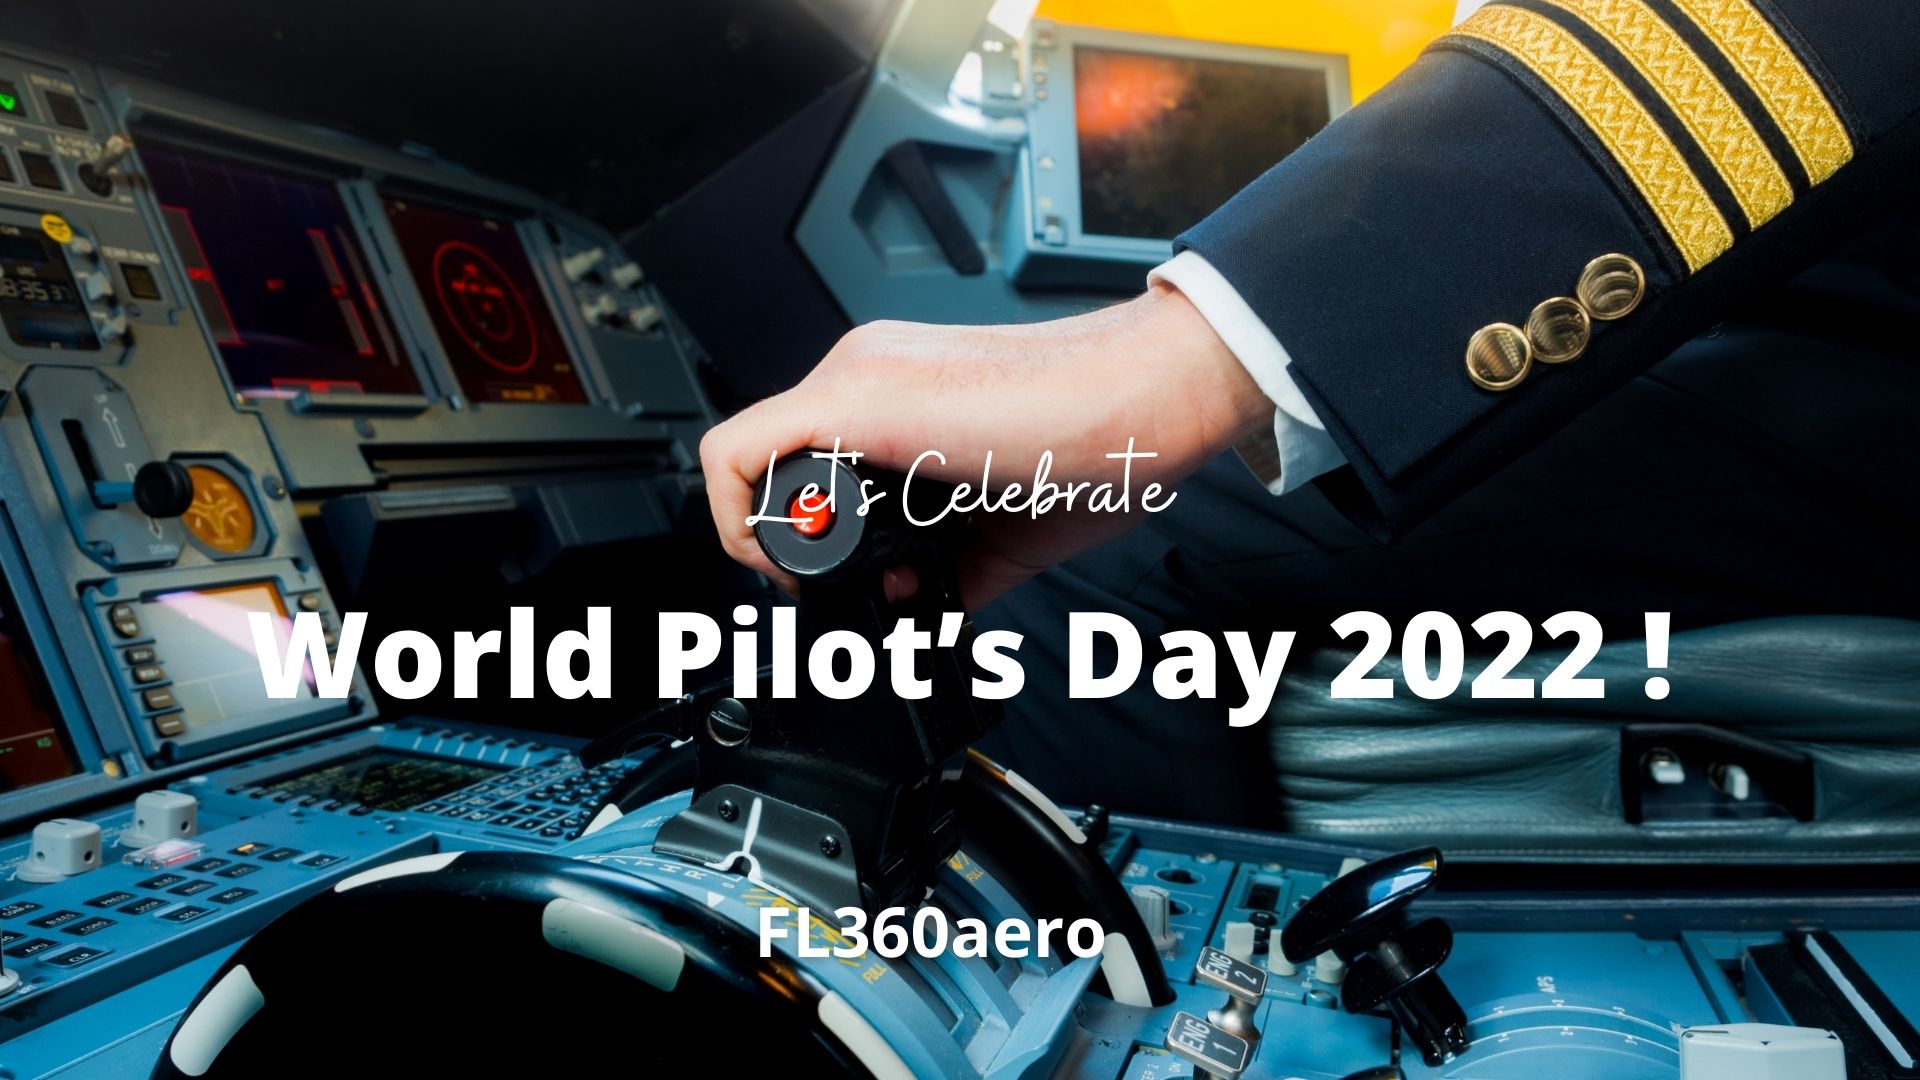 WorldPilotsDay ! Celebrations for the Cockpit !! How did they